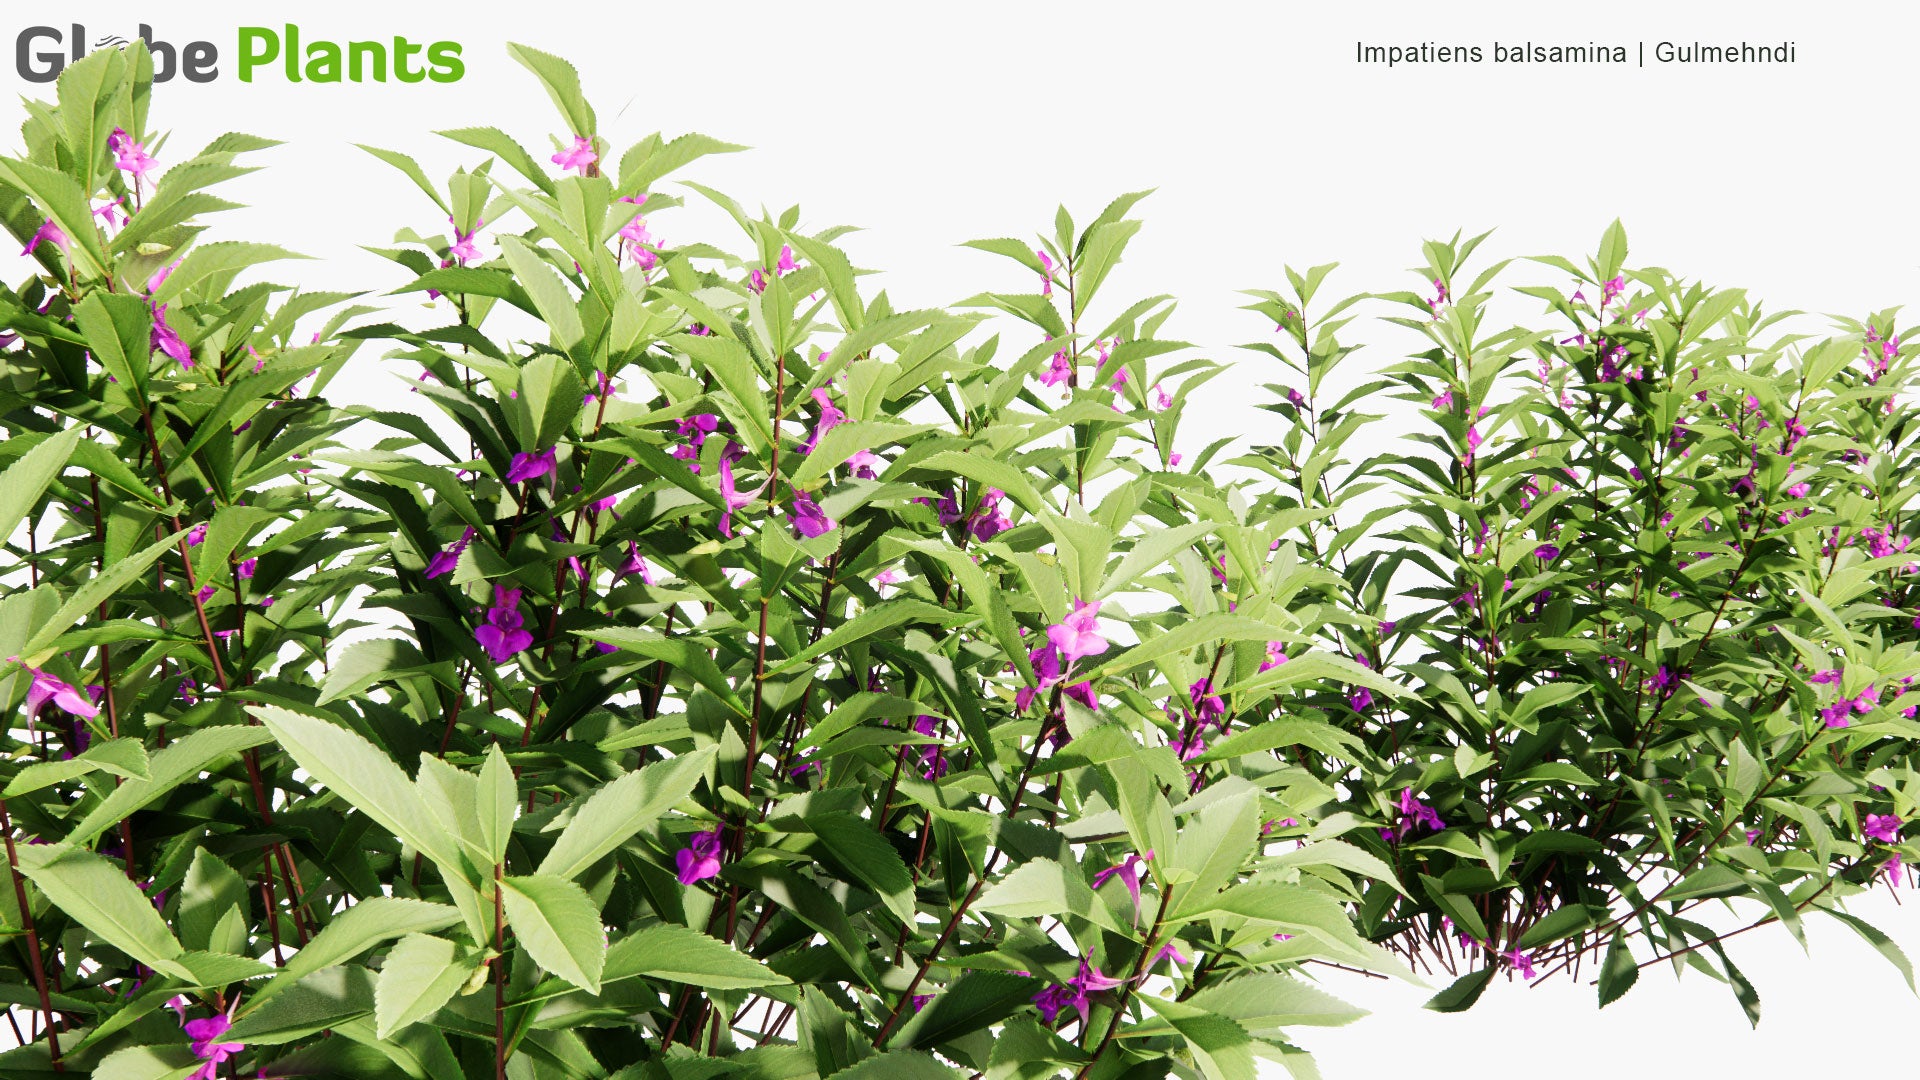 Low Poly Impatiens Balsamina - Gulmehndi, Balsam, Garden Balsam, Rose Balsam, Touch-Me-Not, Spotted Snapweed (3D Model)